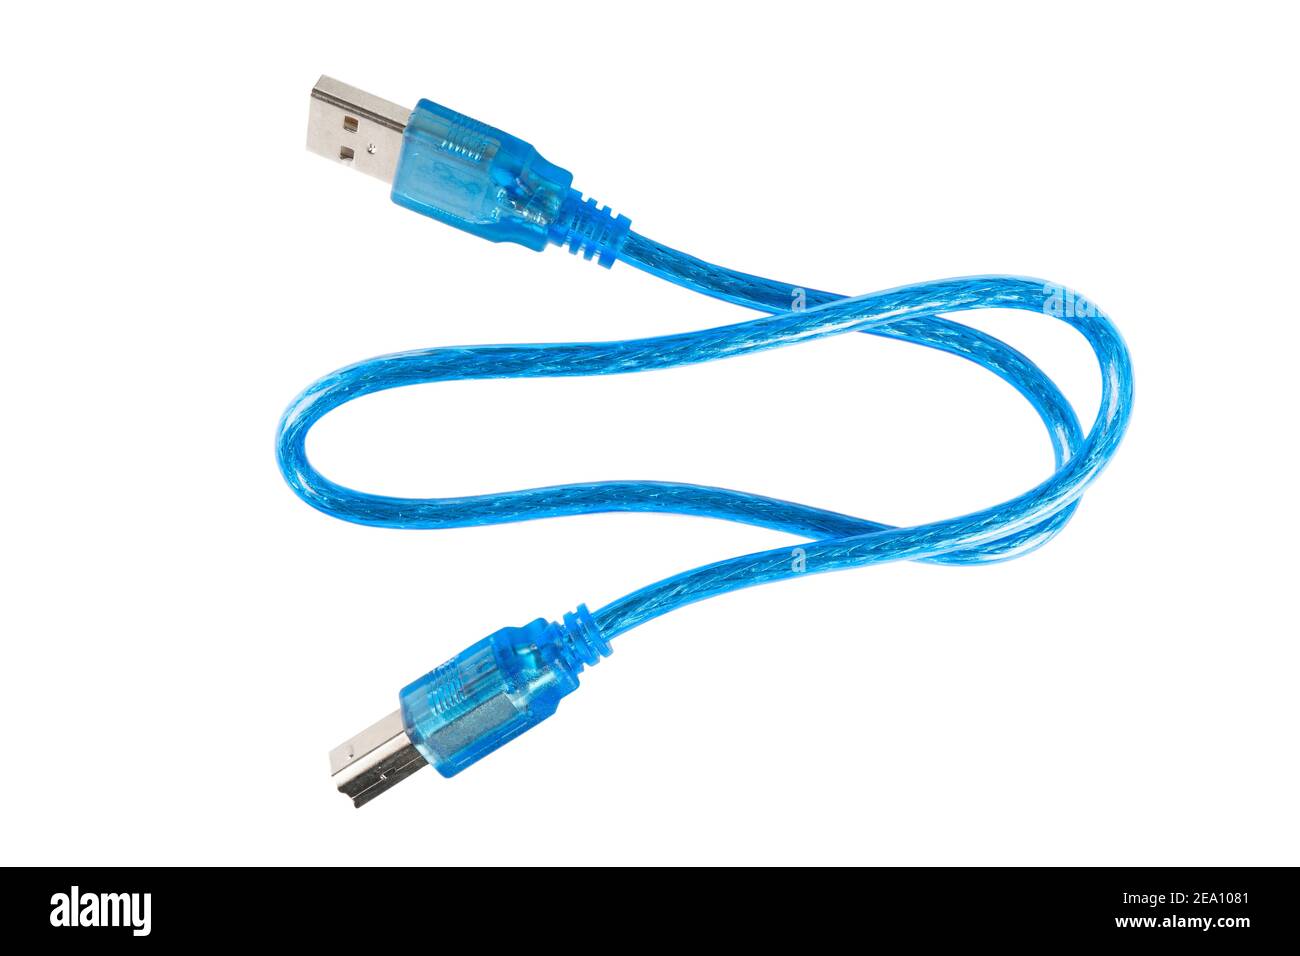 Close up blue USB cable plug isolated on white background. USB data and power cable isolated on white. Stock Photo